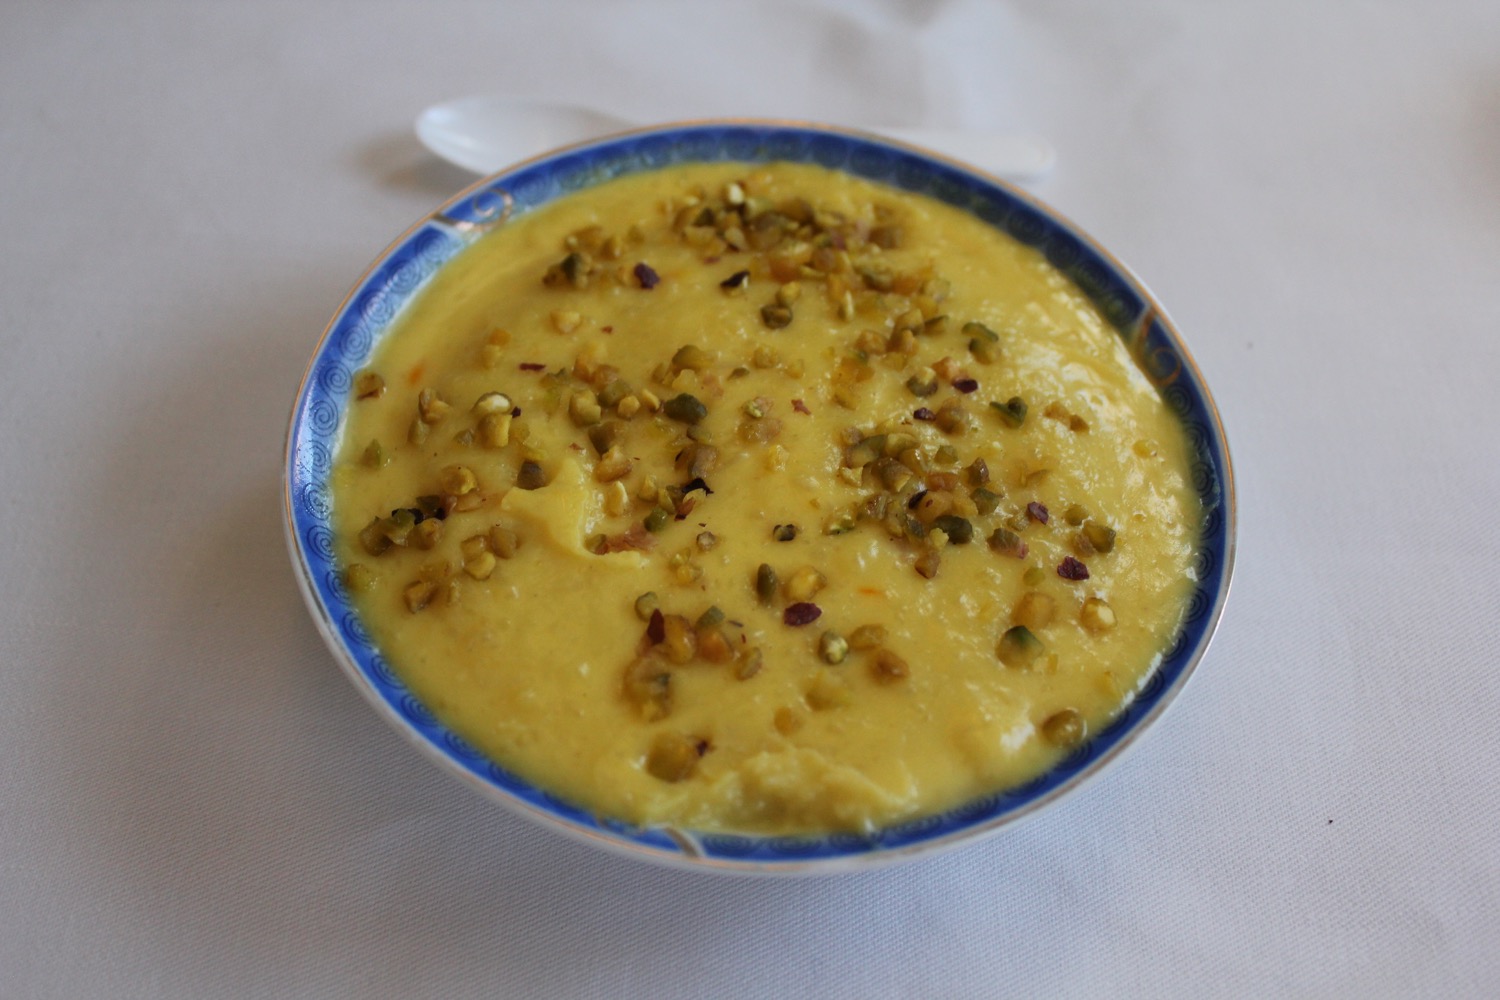 a bowl of yellow soup with green sprinkles